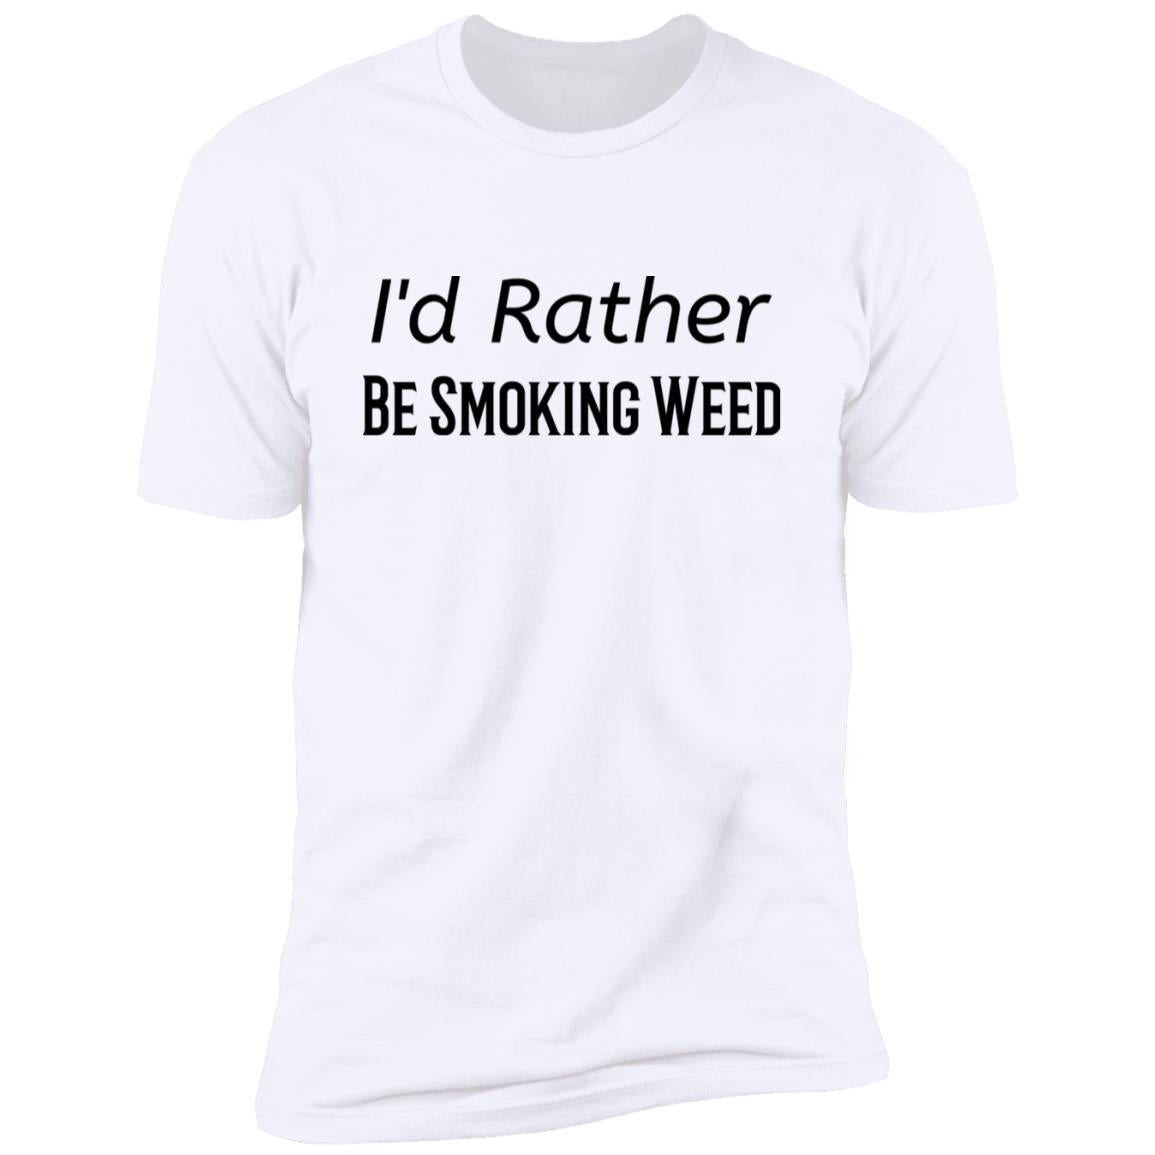 Id rather be smoking weed